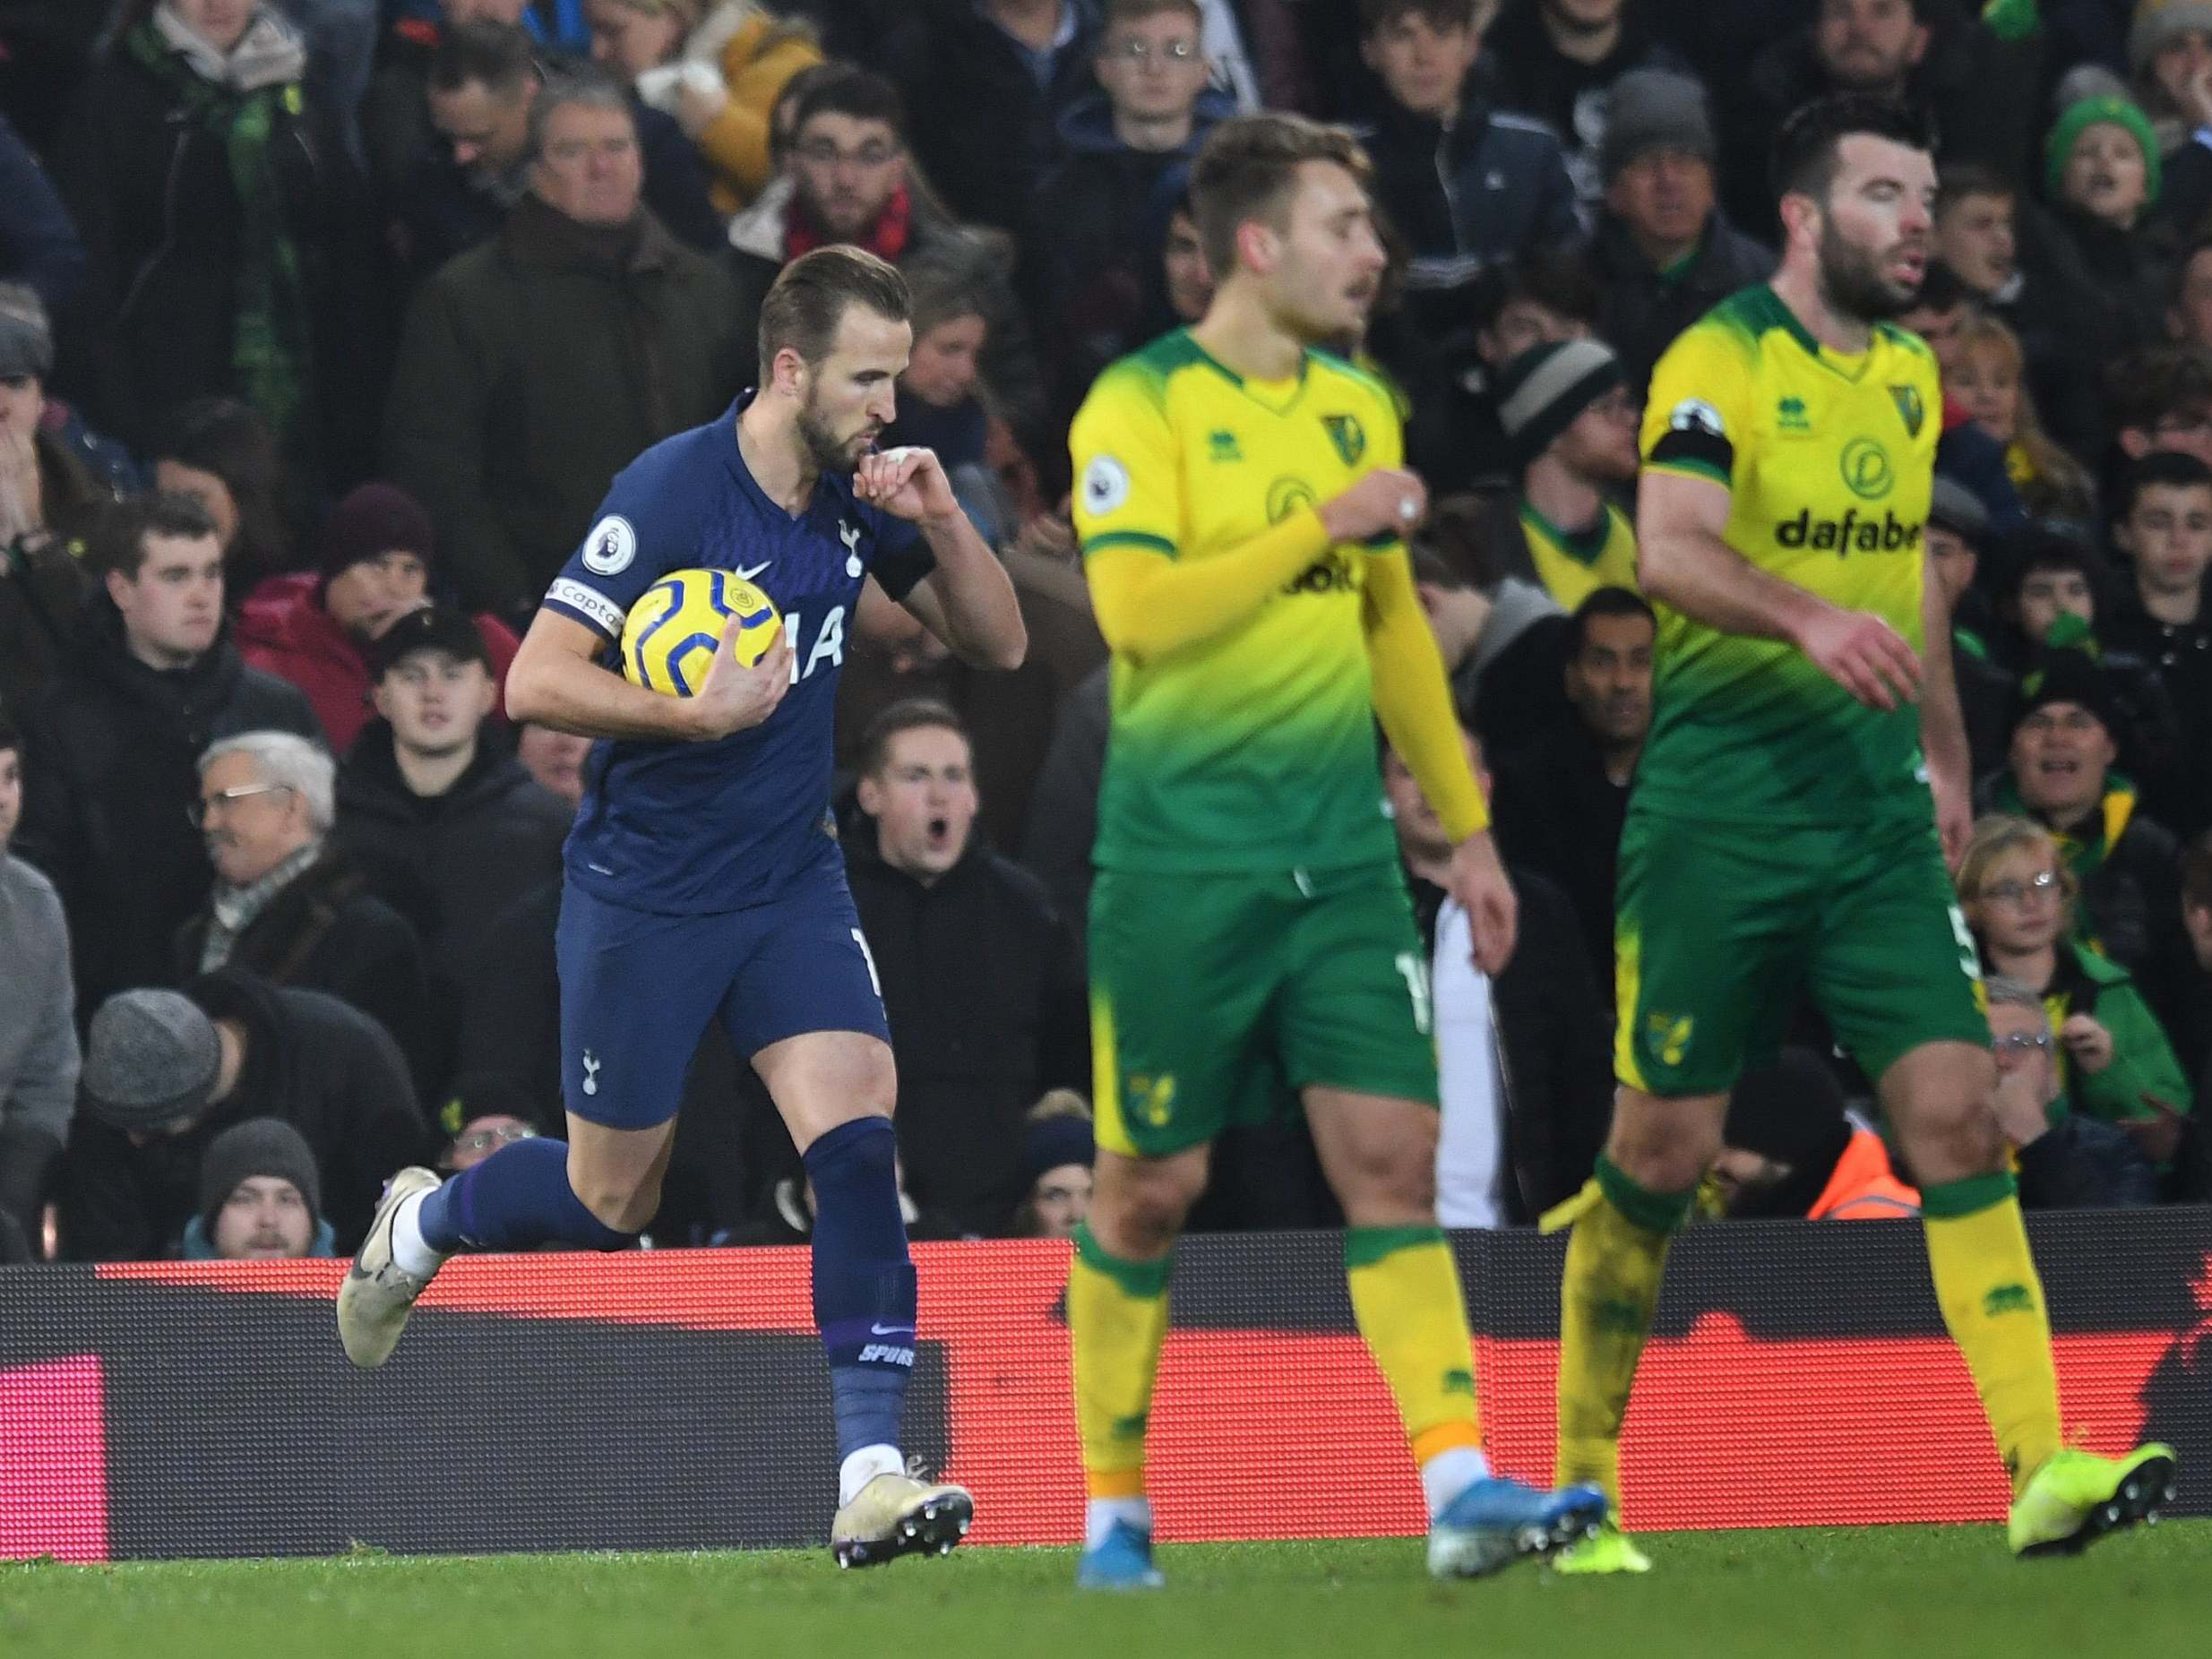 Harry Kane rescues Tottenham as Jose Mourinho's side held to draw by Norwich at Carrow Road